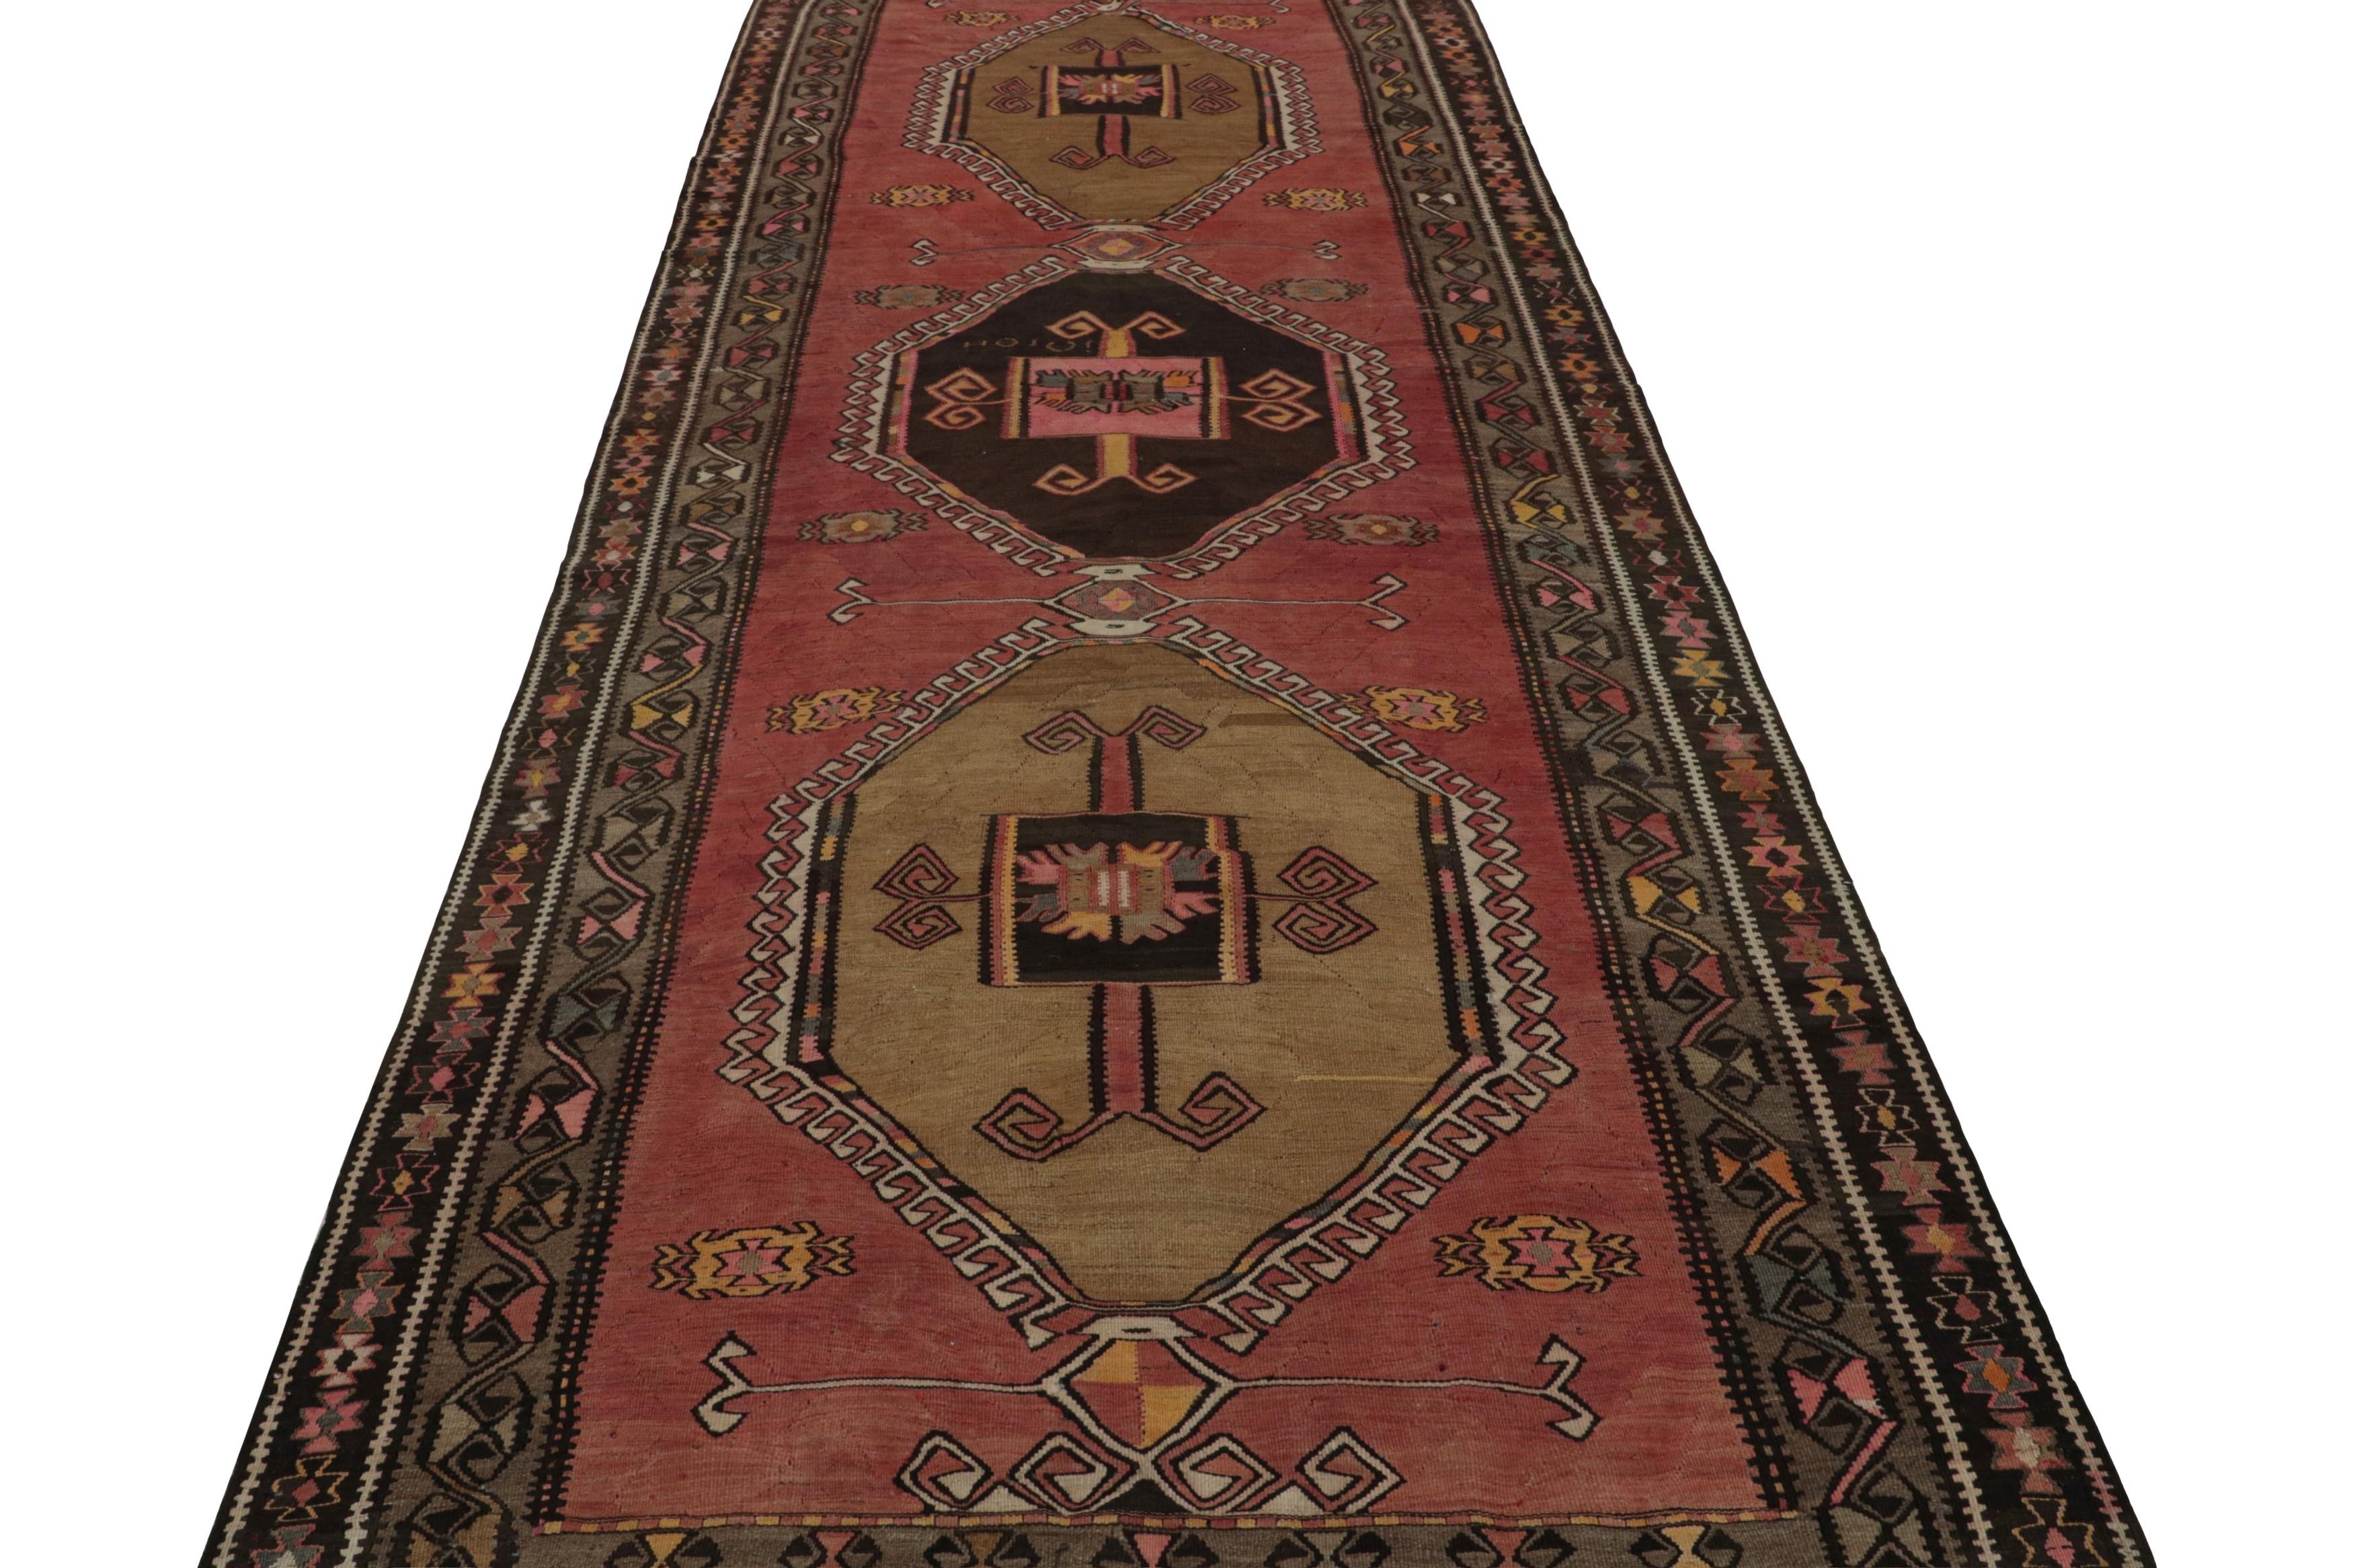 Hand-Woven Vintage Afghani Tribal Kilim Gallery Runner Rug with Medallions from Rug & Kilim For Sale